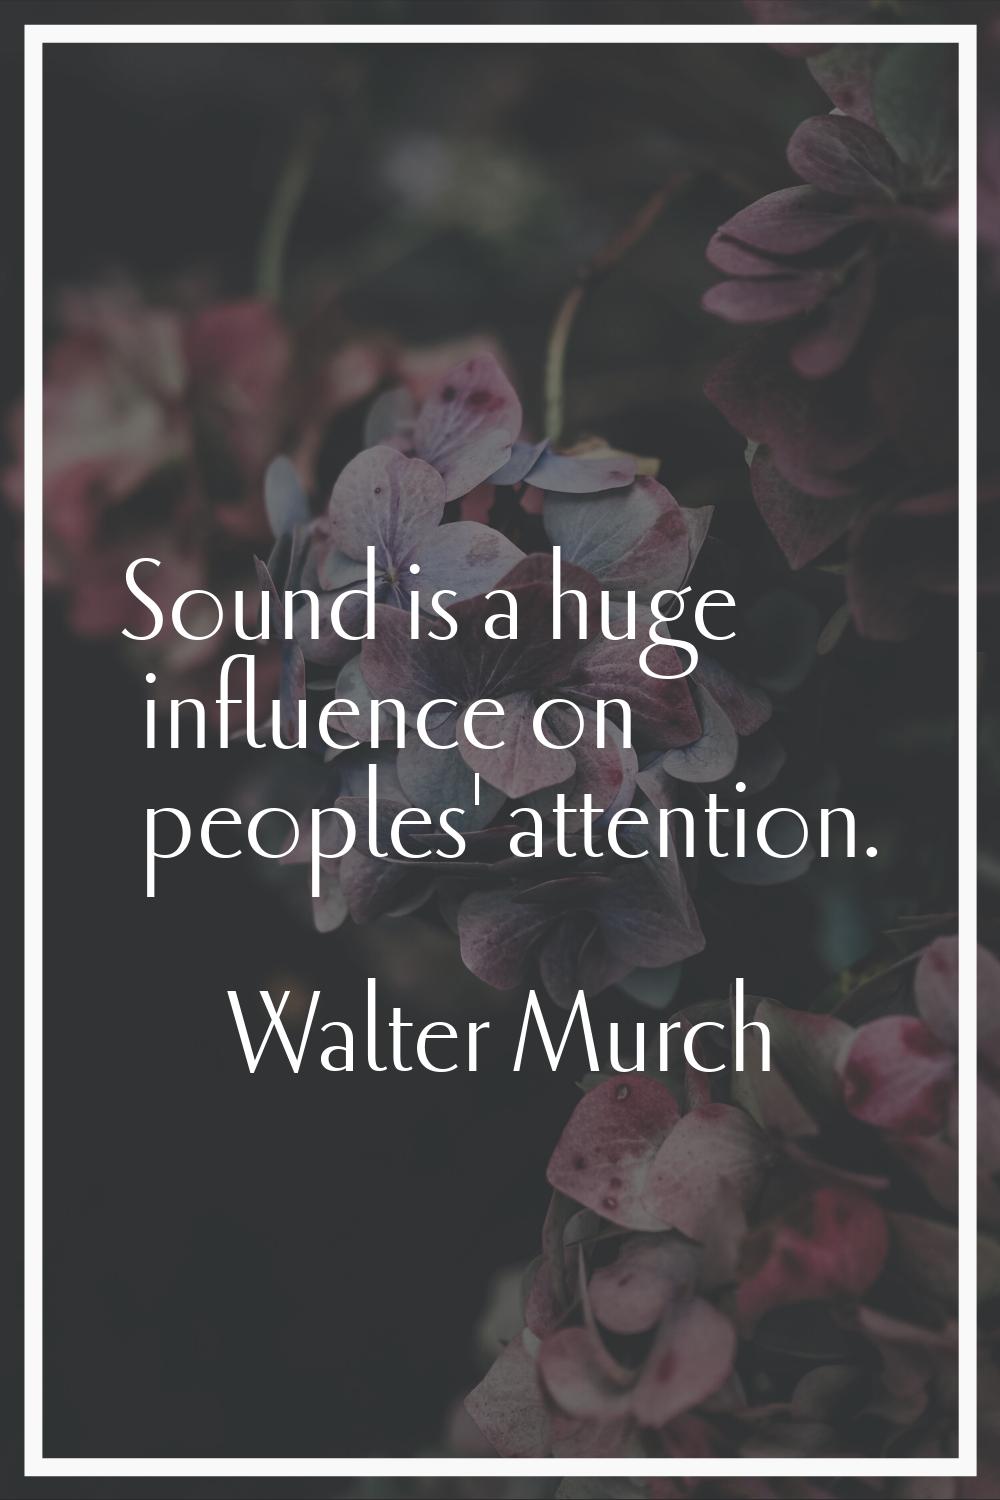 Sound is a huge influence on peoples' attention.